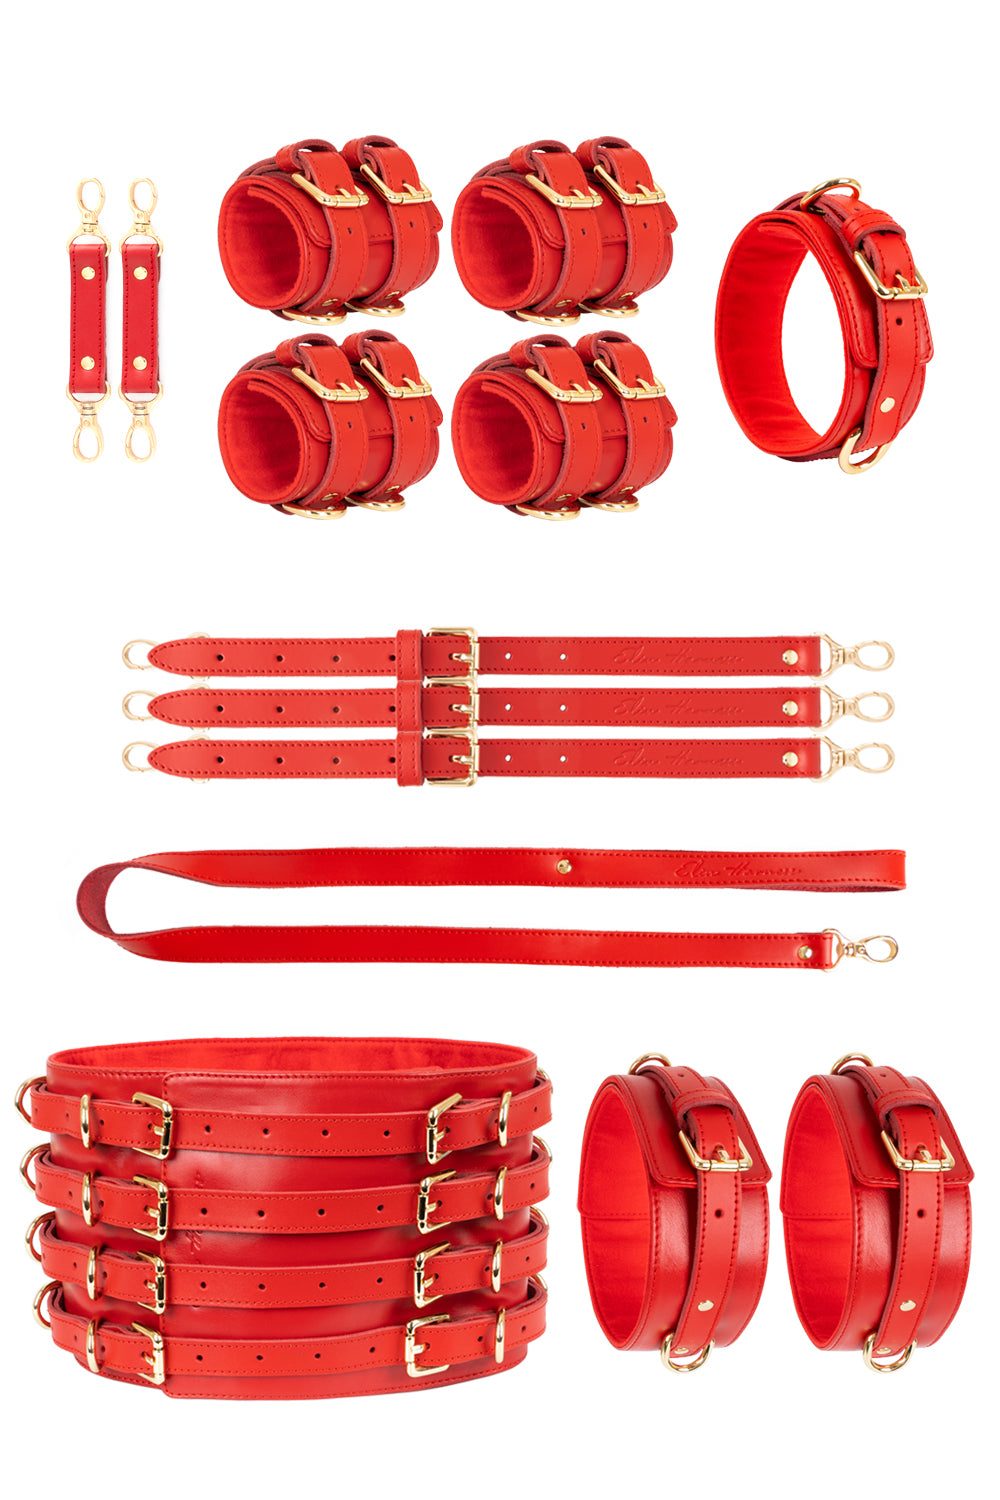 Red Luxury Full Leather Set with Wide Belt and Cuffs